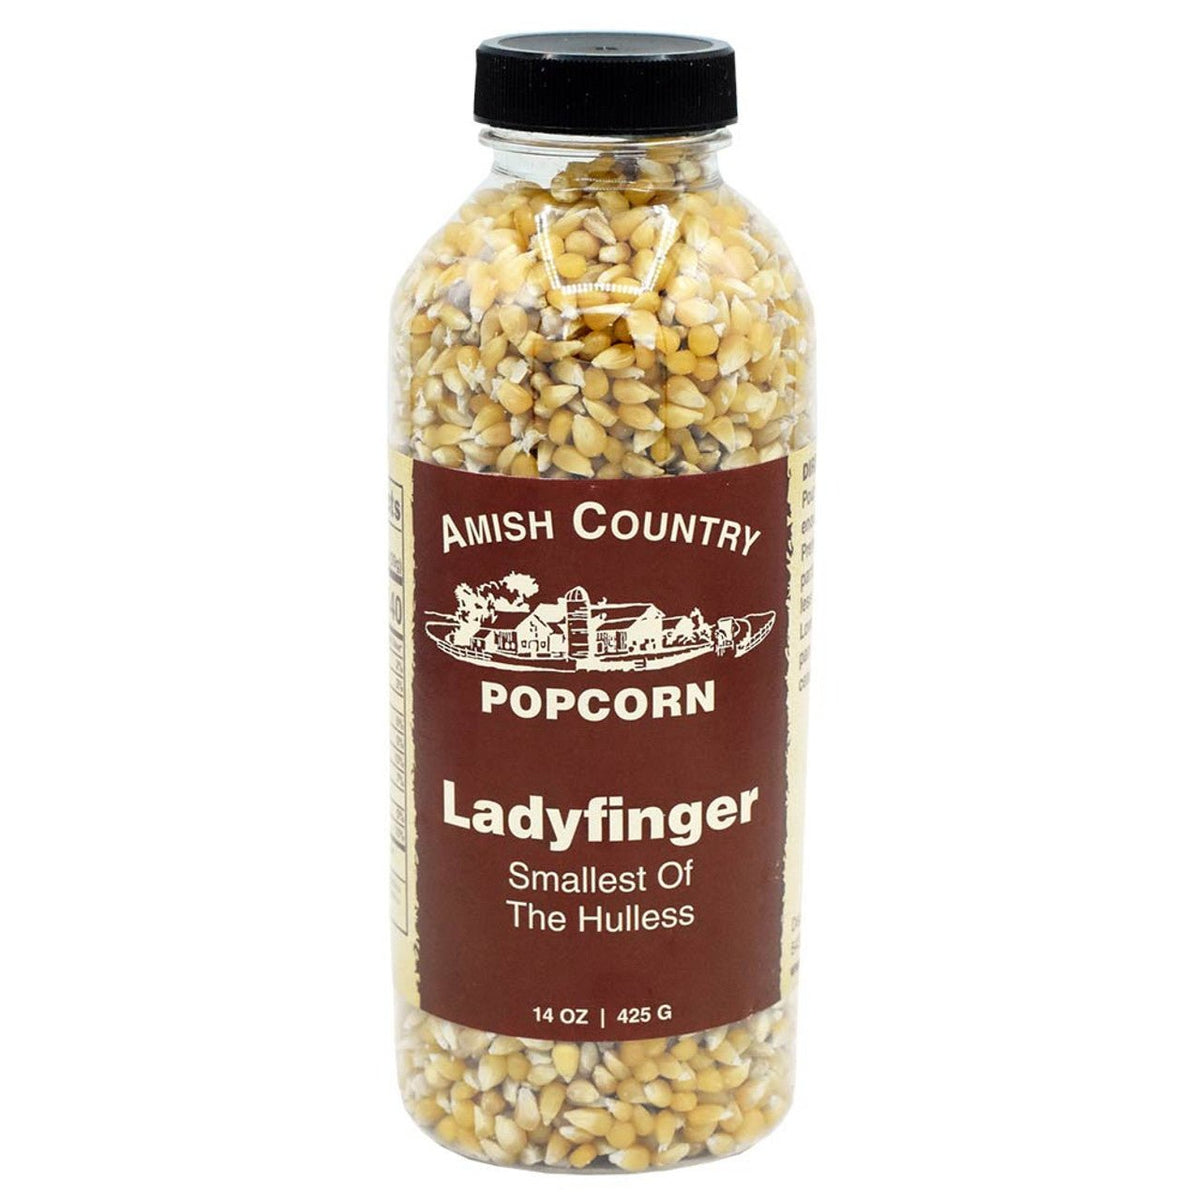 Amish Country Popcorn - 14oz Bottle of Ladyfinger Popcorn - Pacific Flyway Supplies